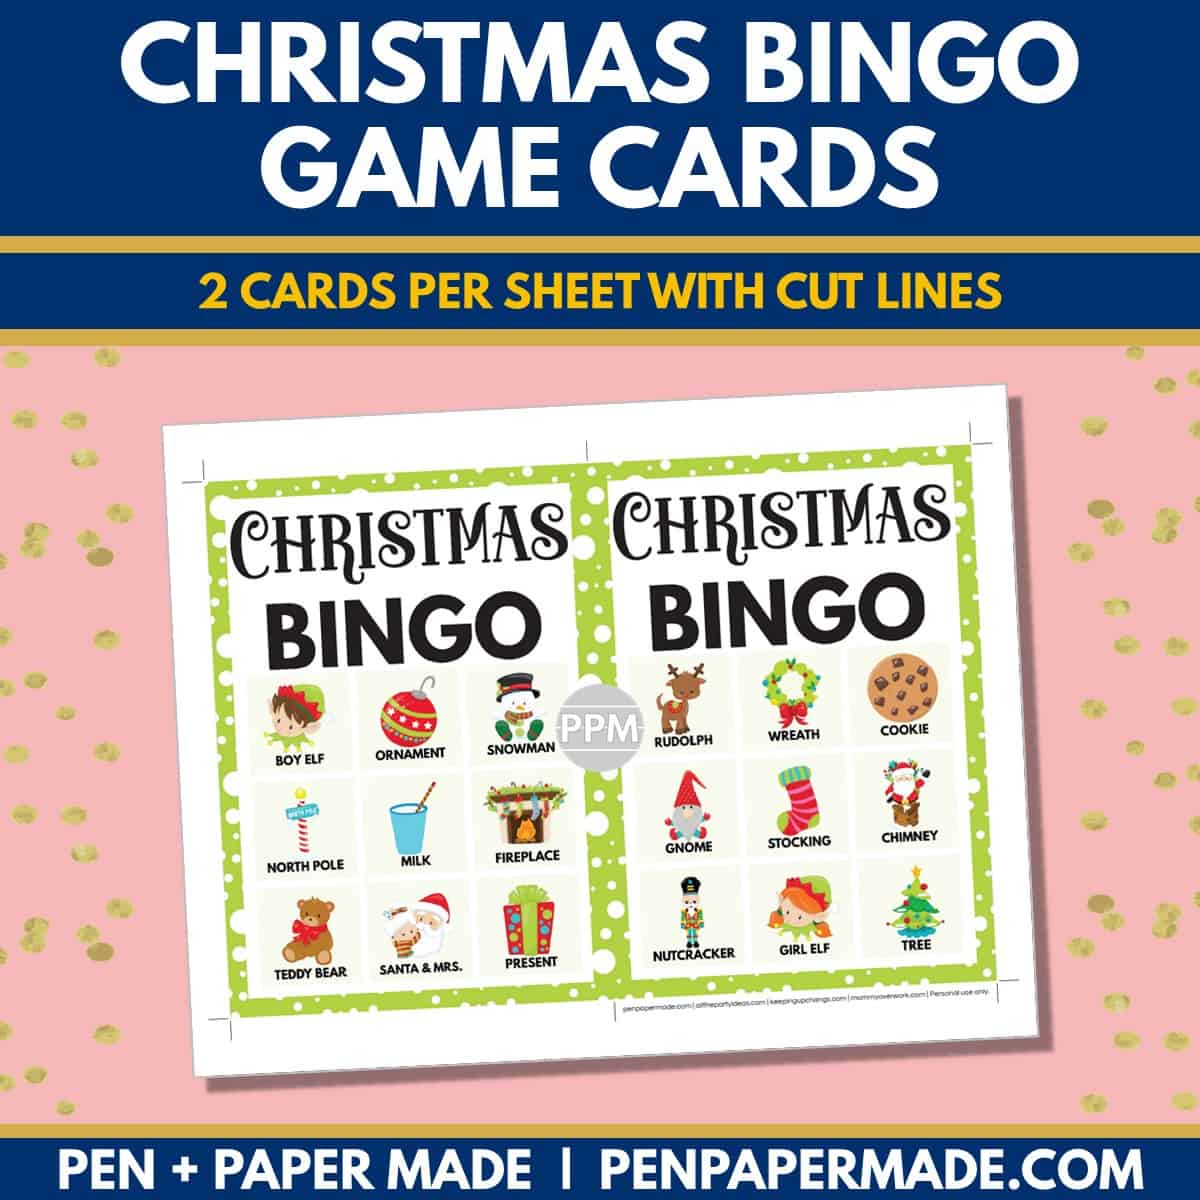 christmas bingo card 3x3 5x7 game boards with images and text words.